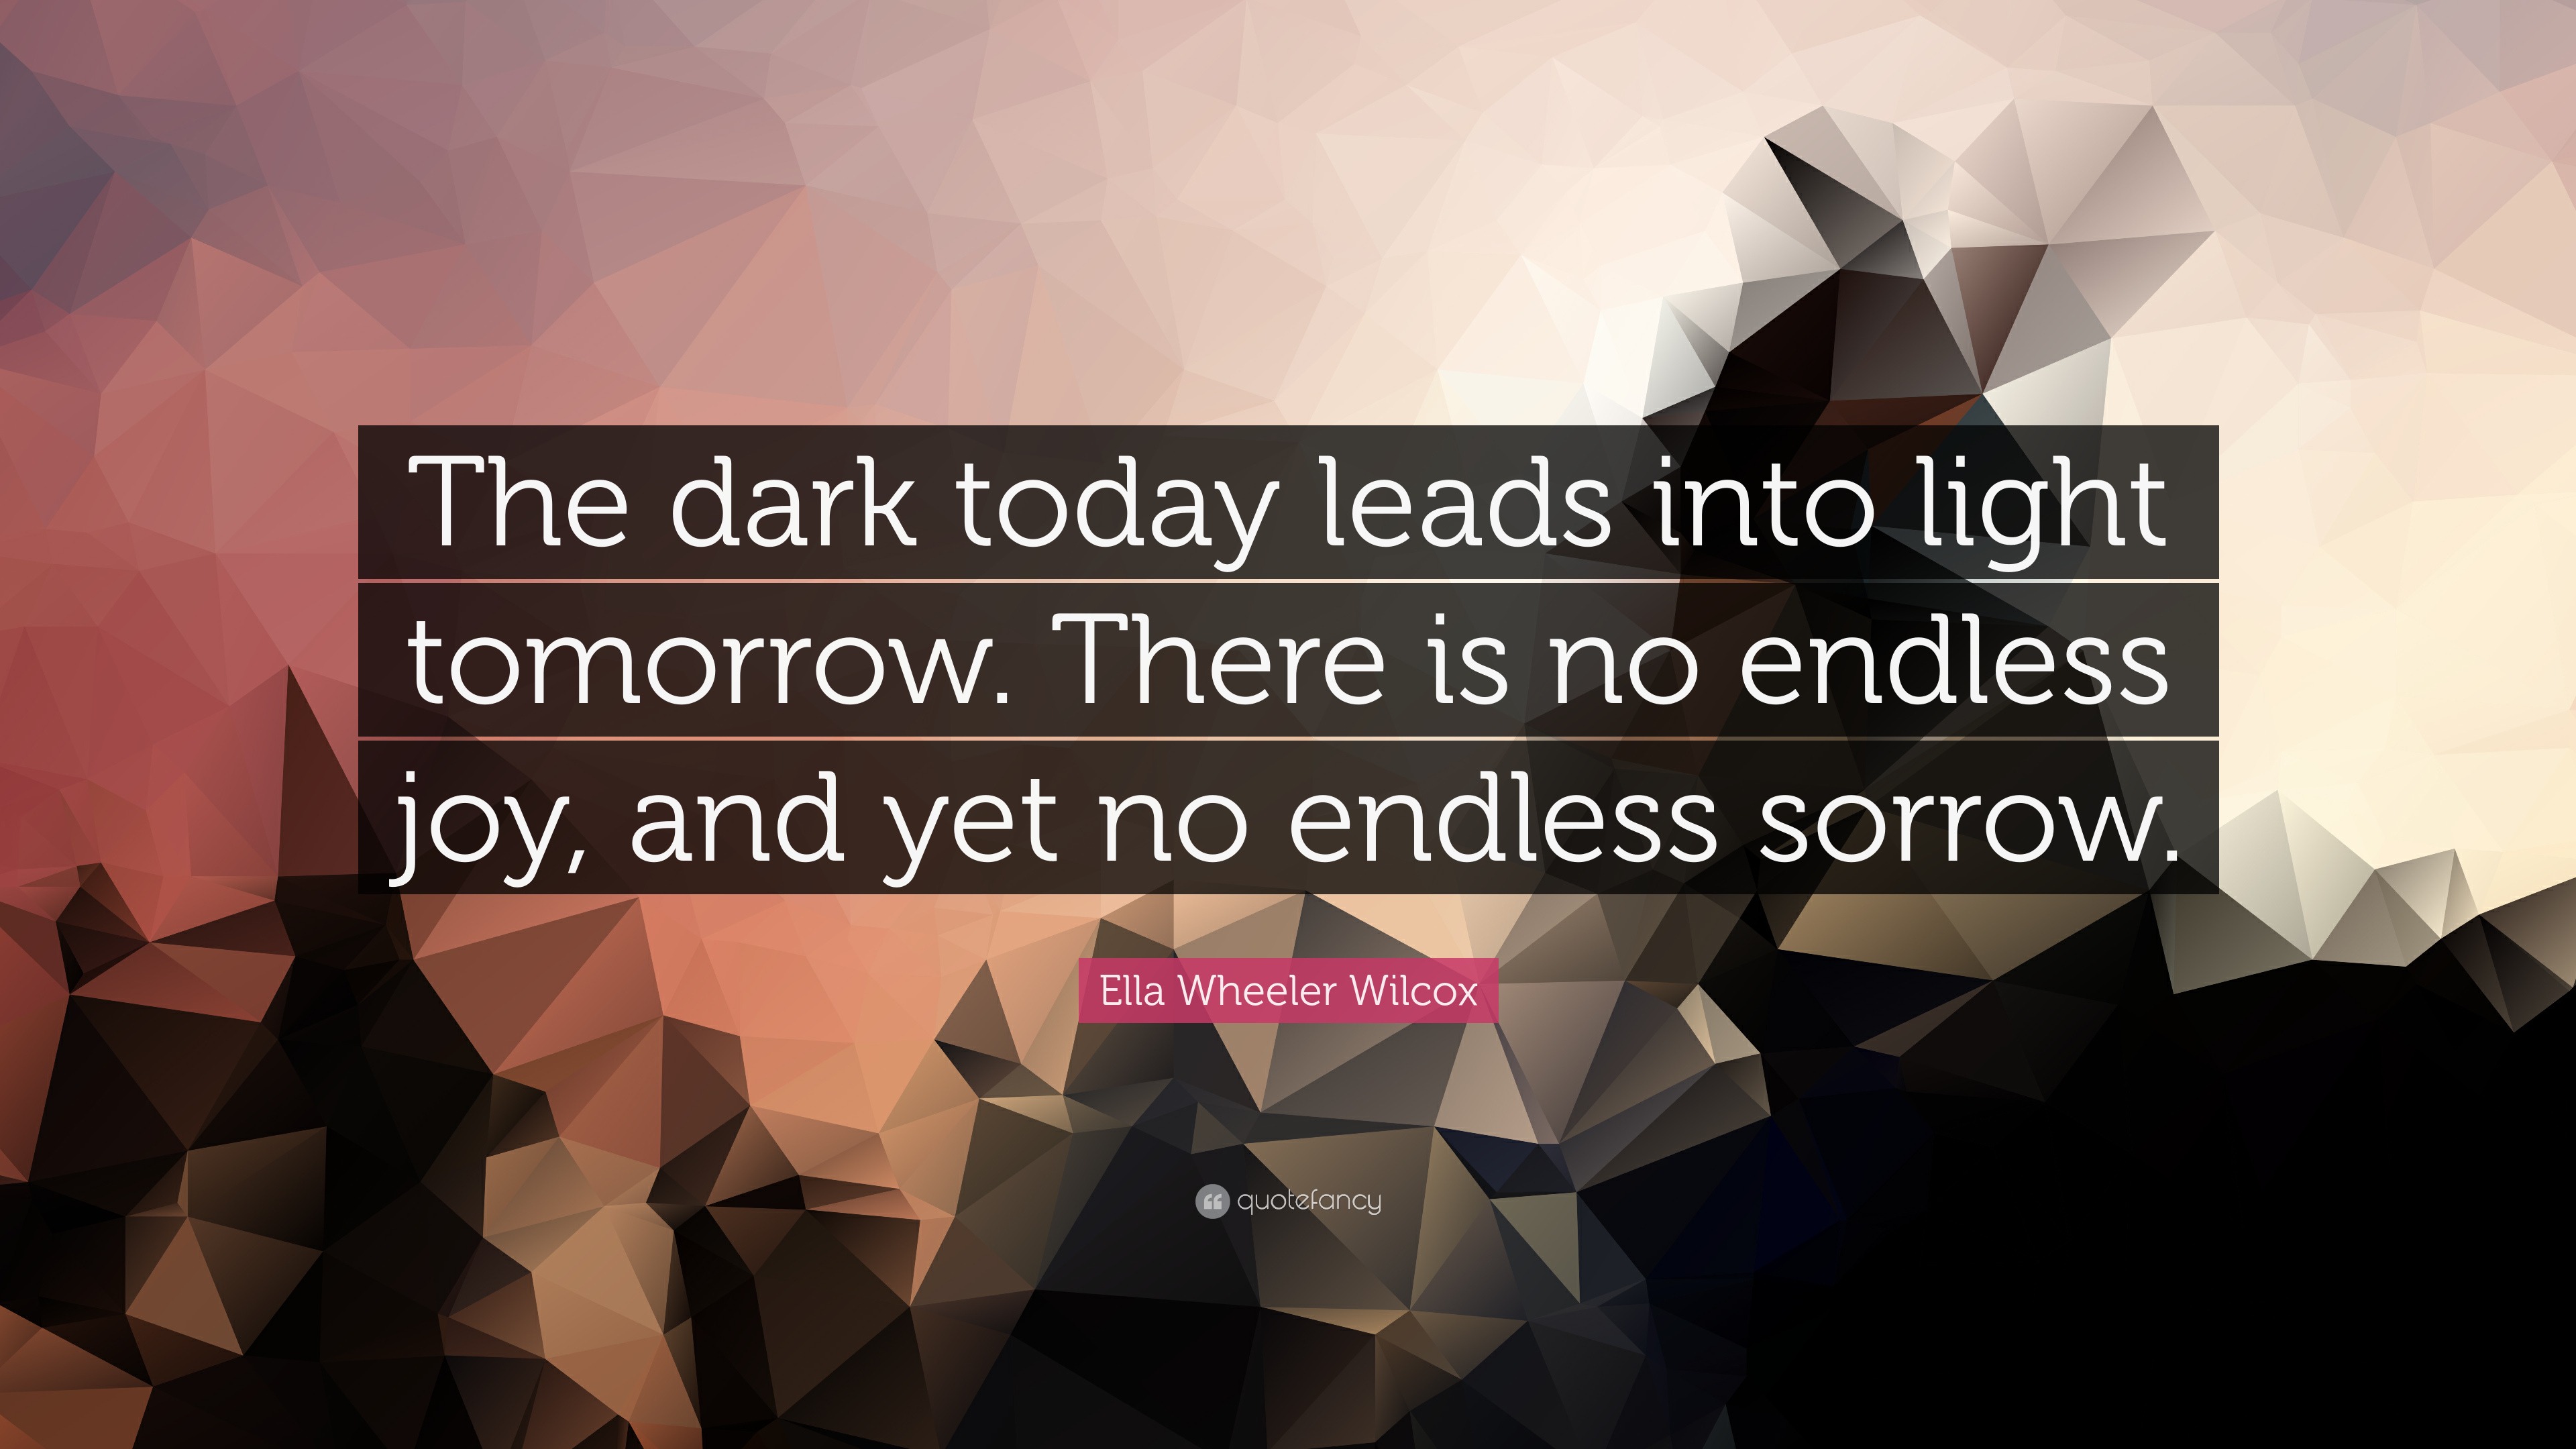 “The dark today leads into light tomorrow. There is no endless joy, and yet no endless sorrow.”